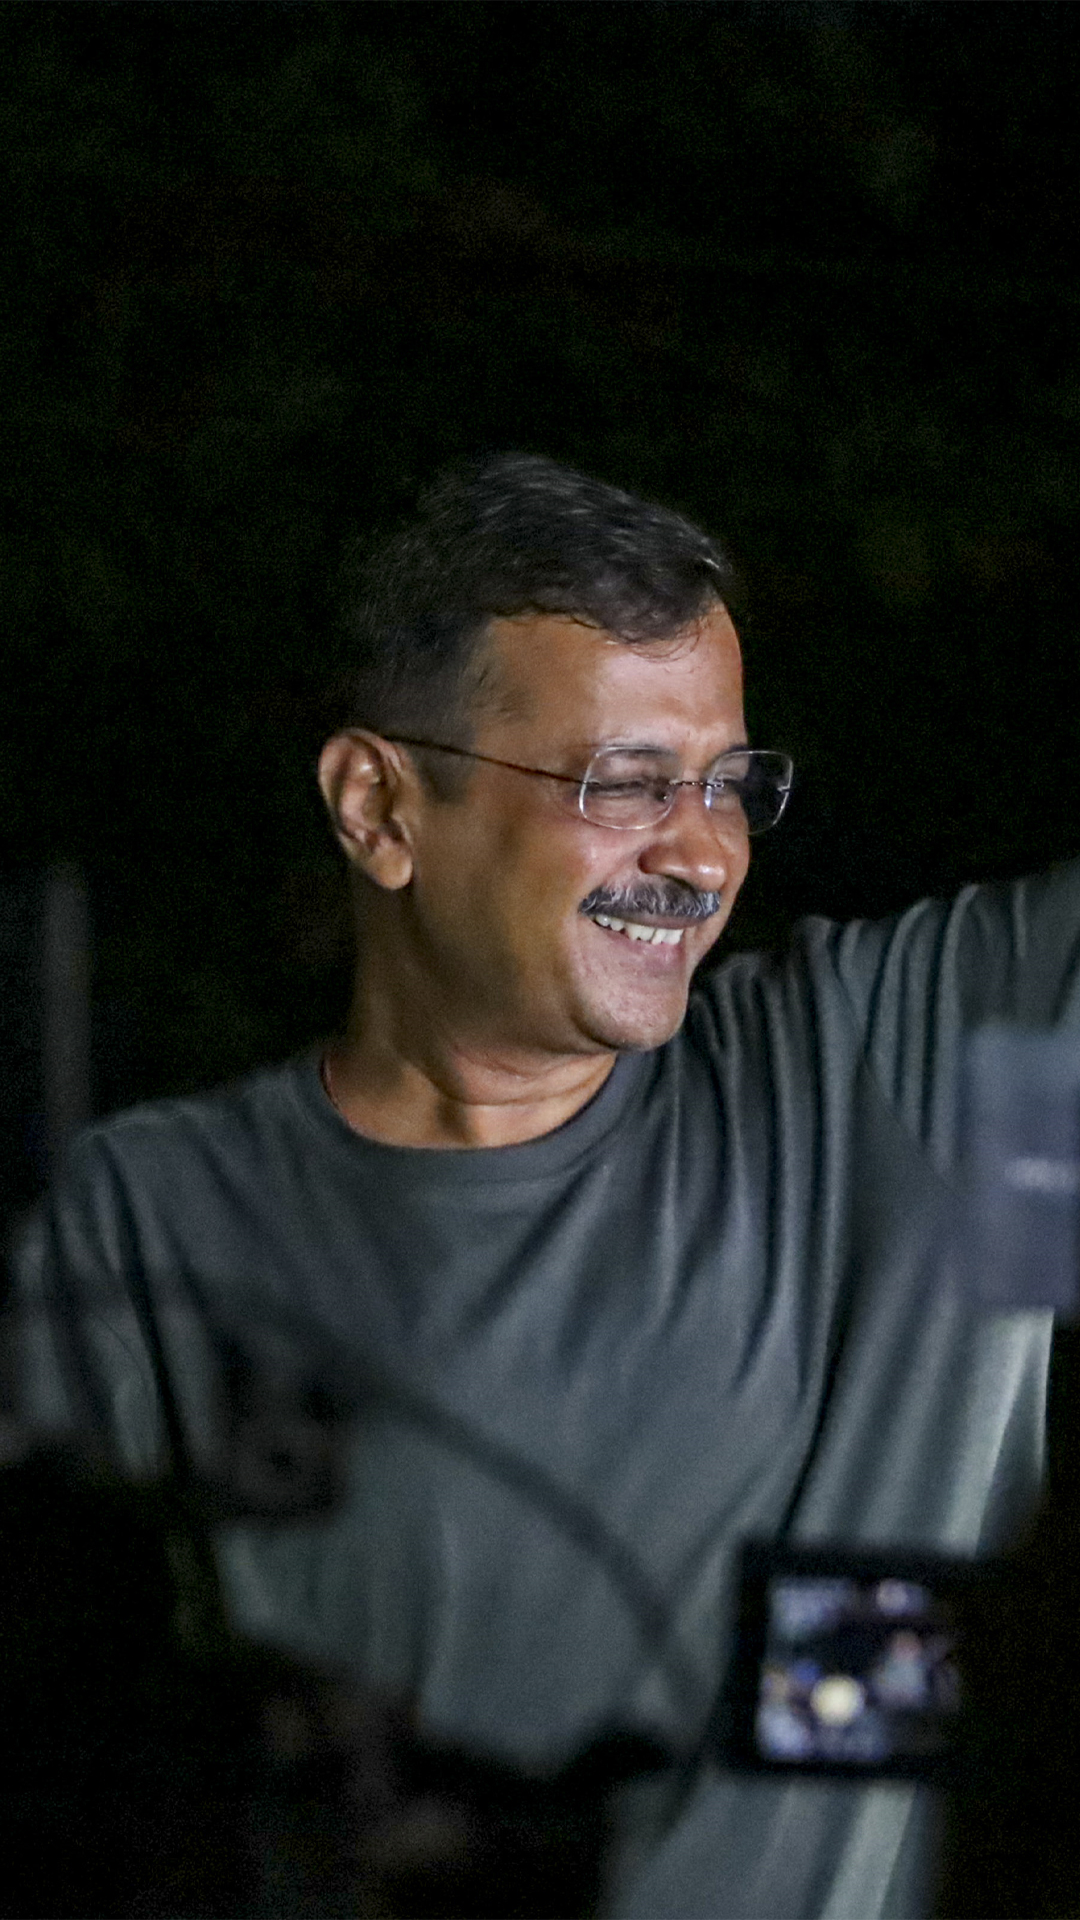 Delhi CM Arvind Kejriwal receives a warm welcome as he walks out of Tihar Jail, after the Supreme Court's decision 